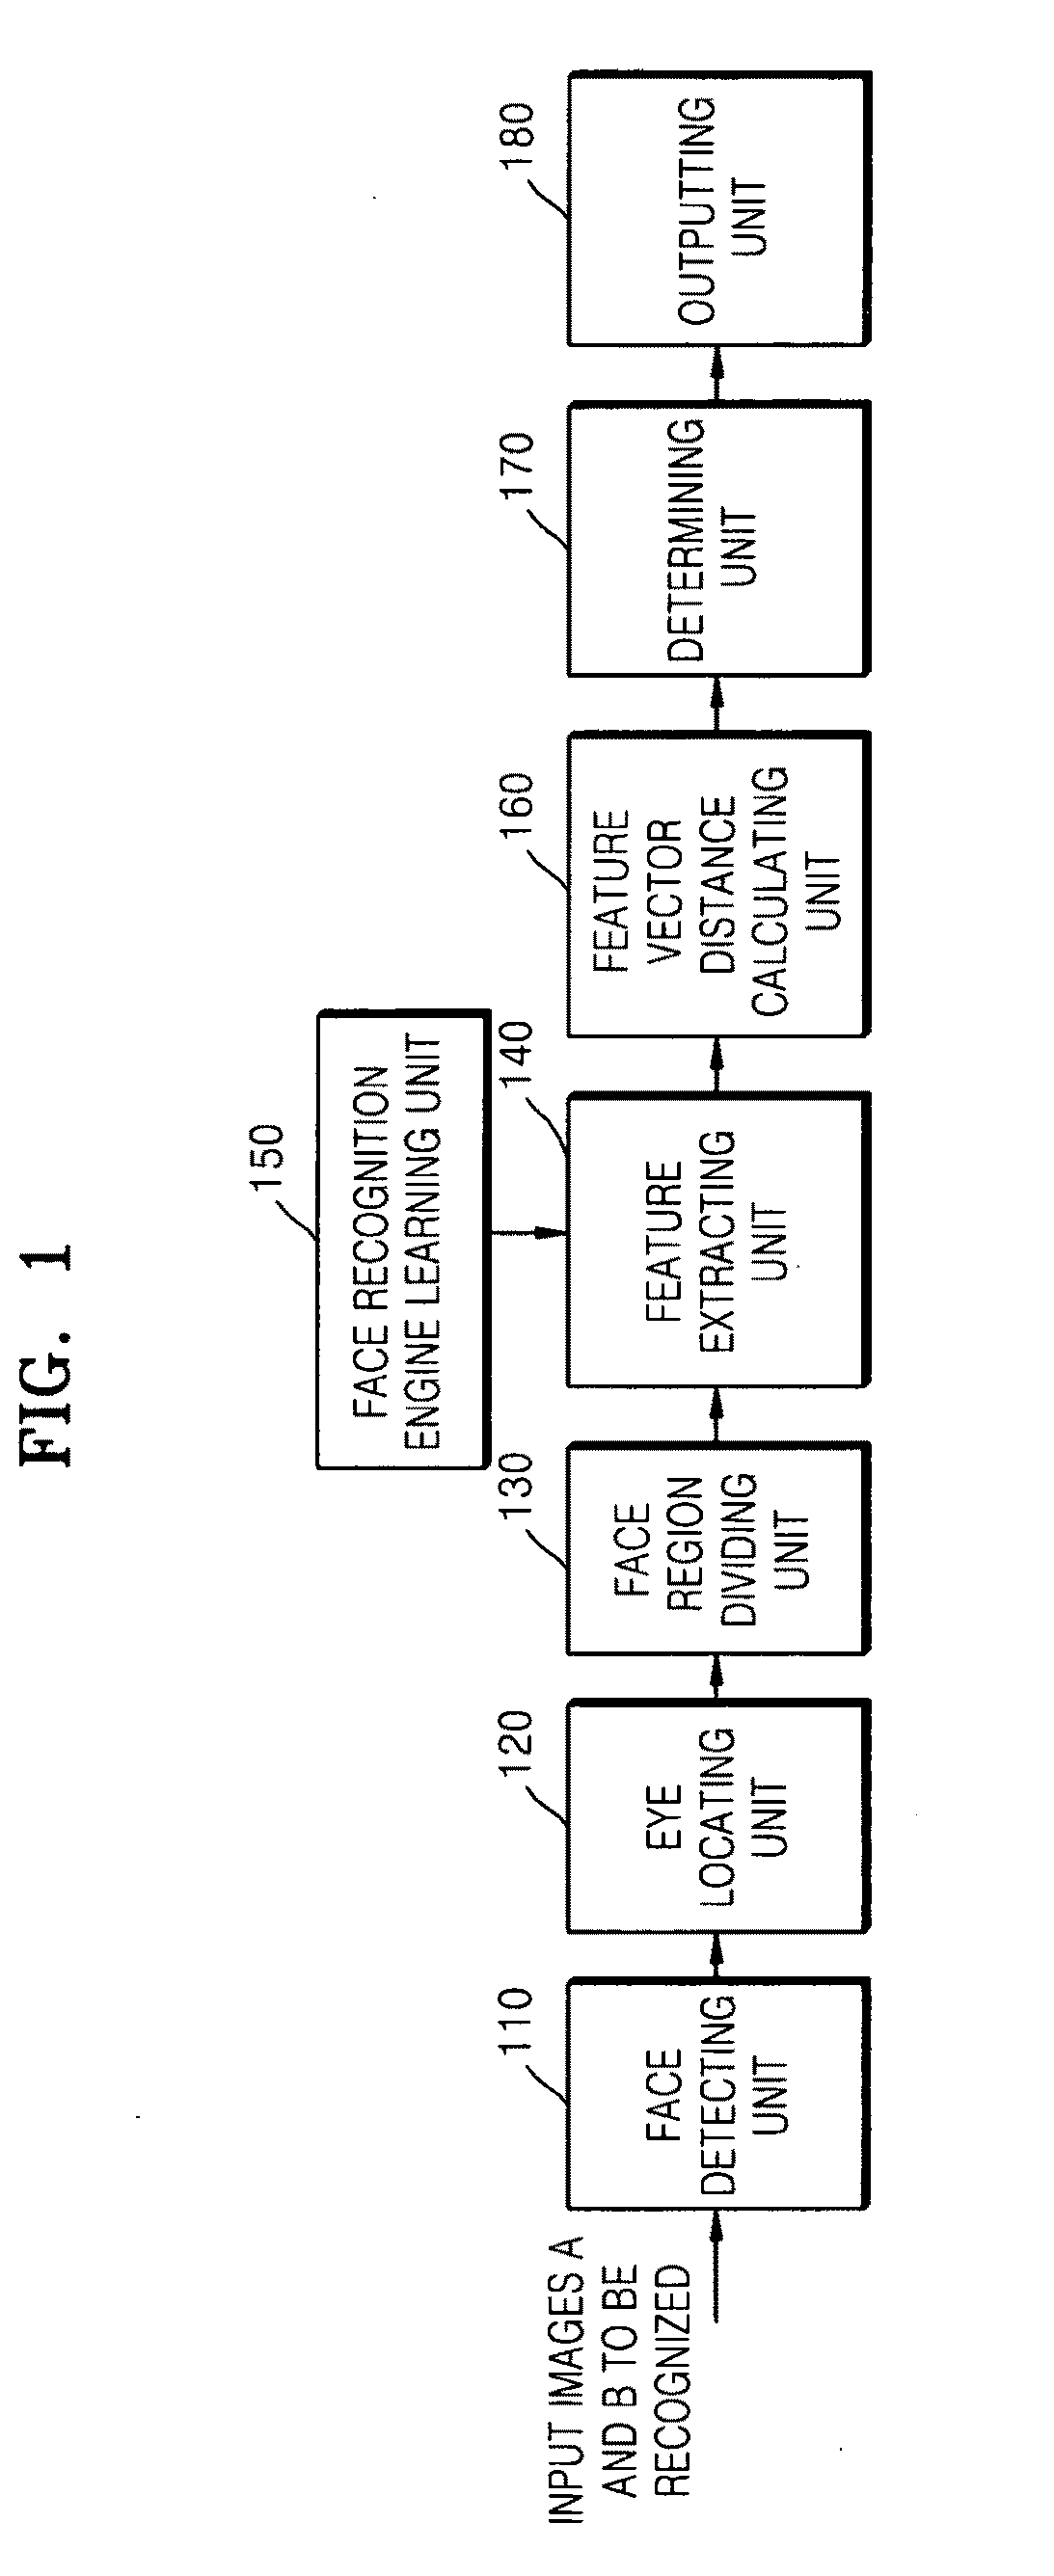 Multi-view face recognition method and system